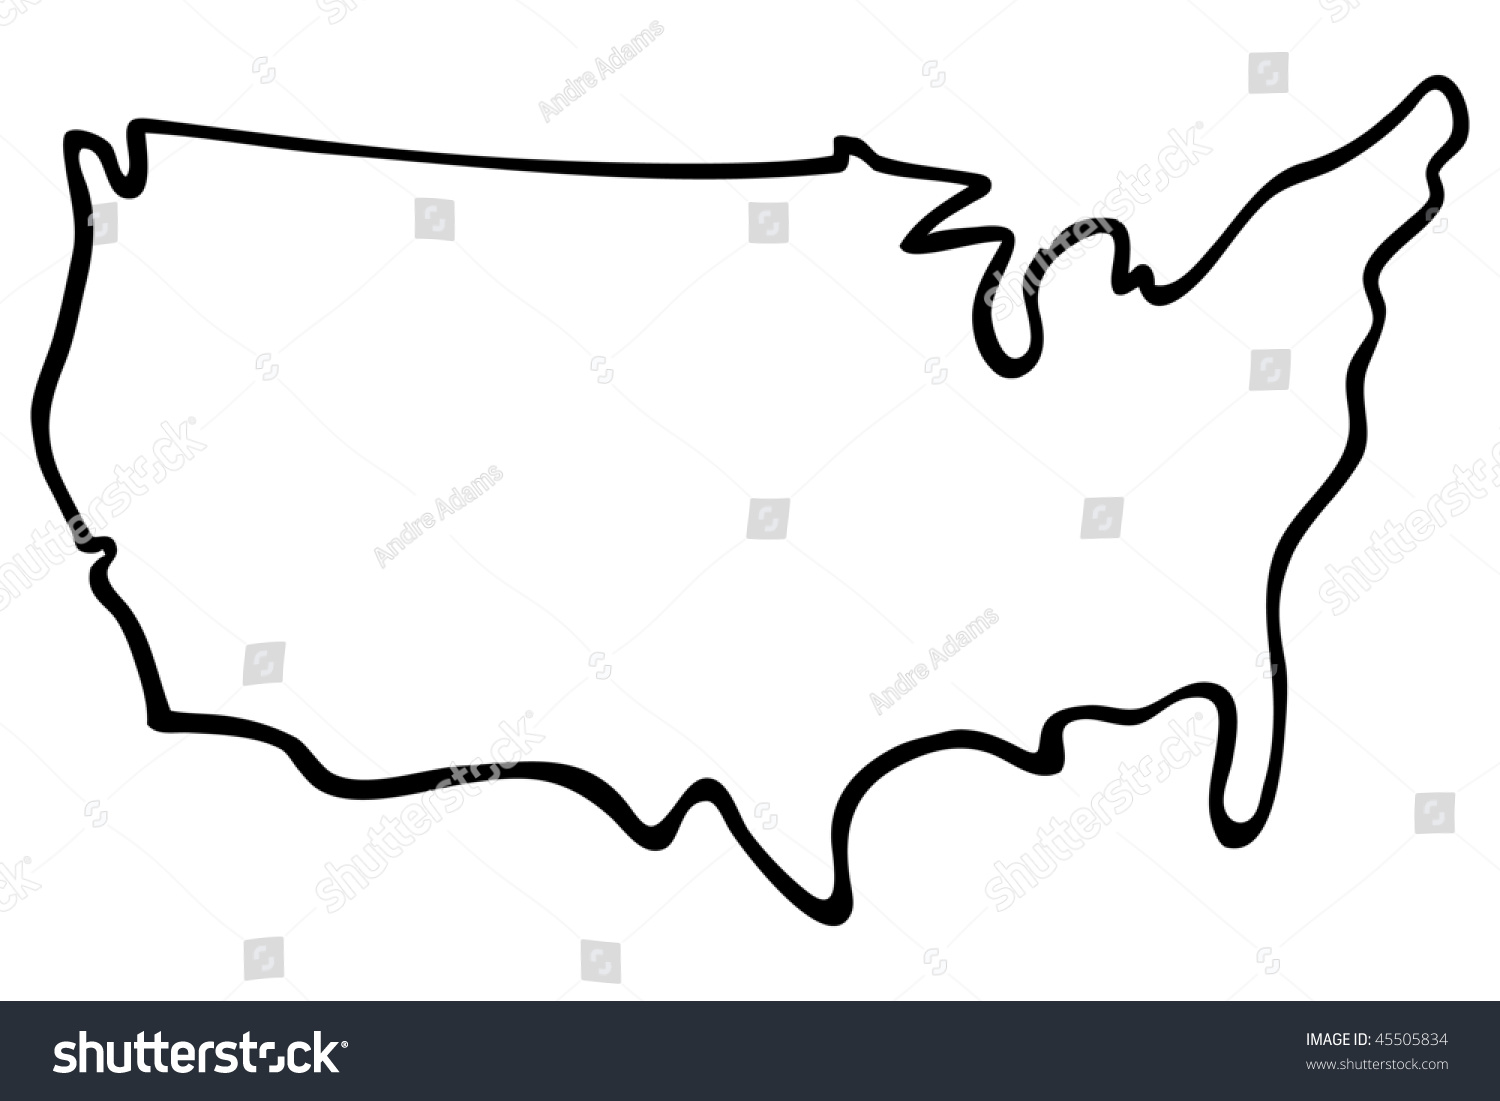 clipart of united states map outline - photo #42